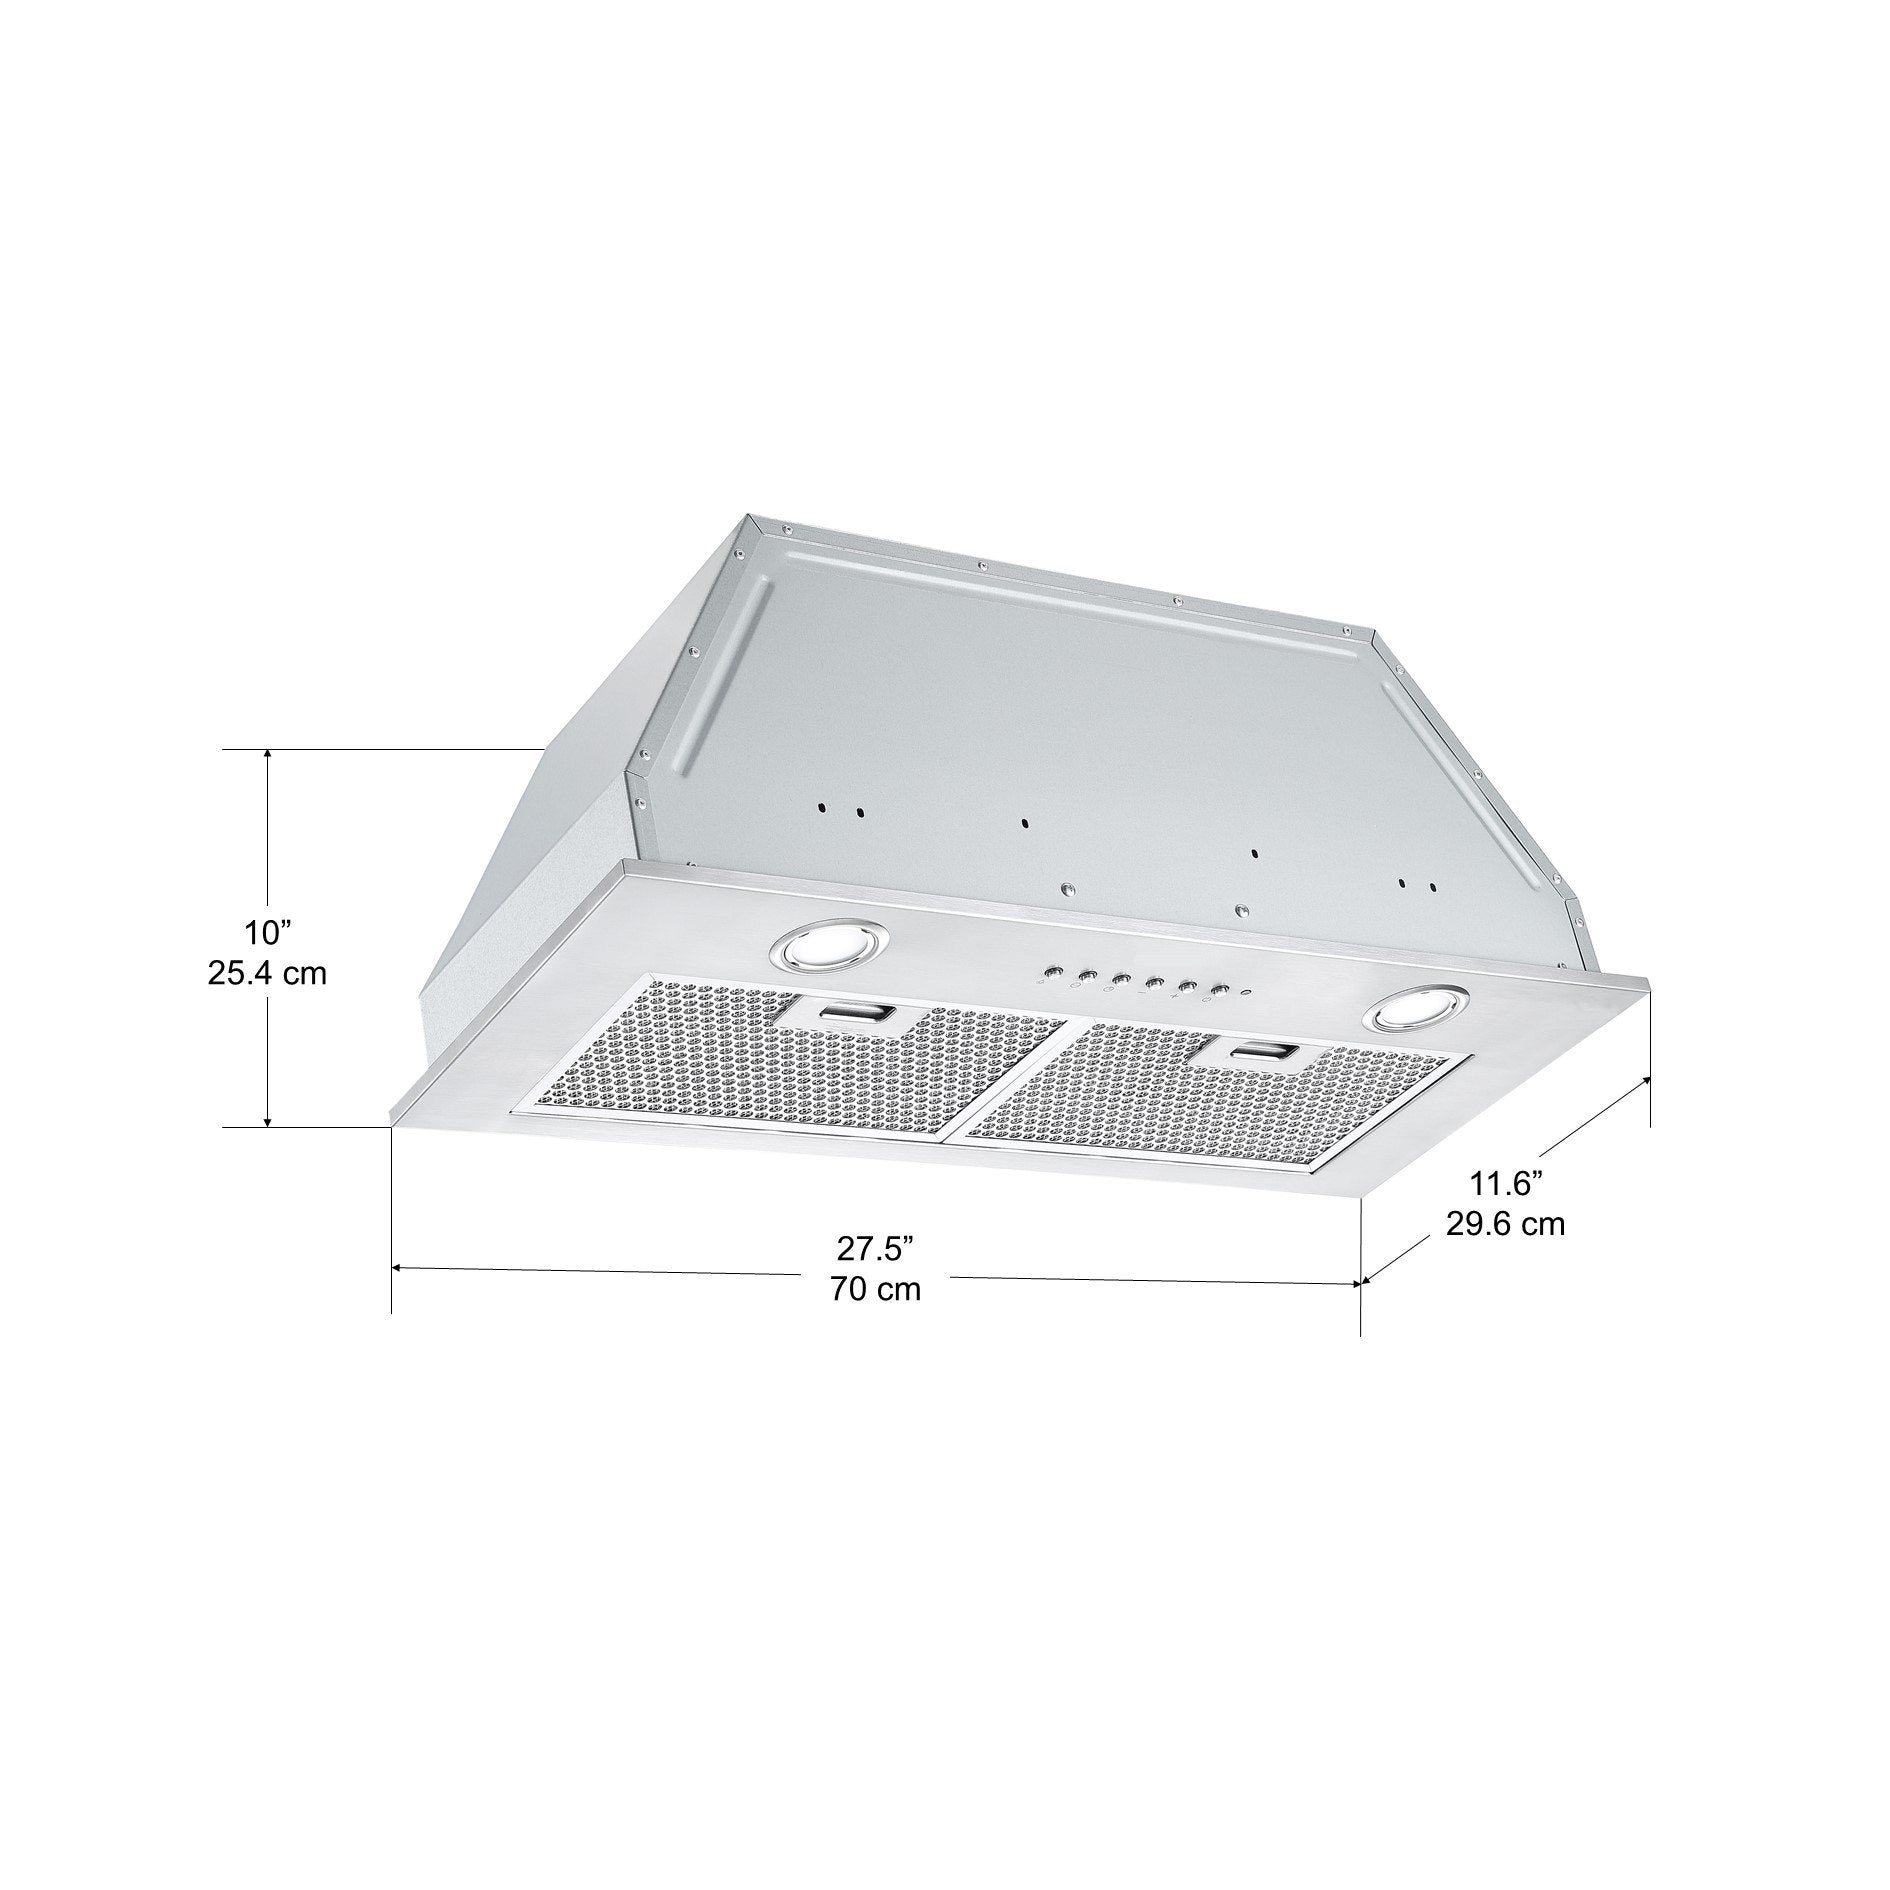 Inserta III 28 in. Built-in Range Hood with Night Light Feature in Stainless Steel